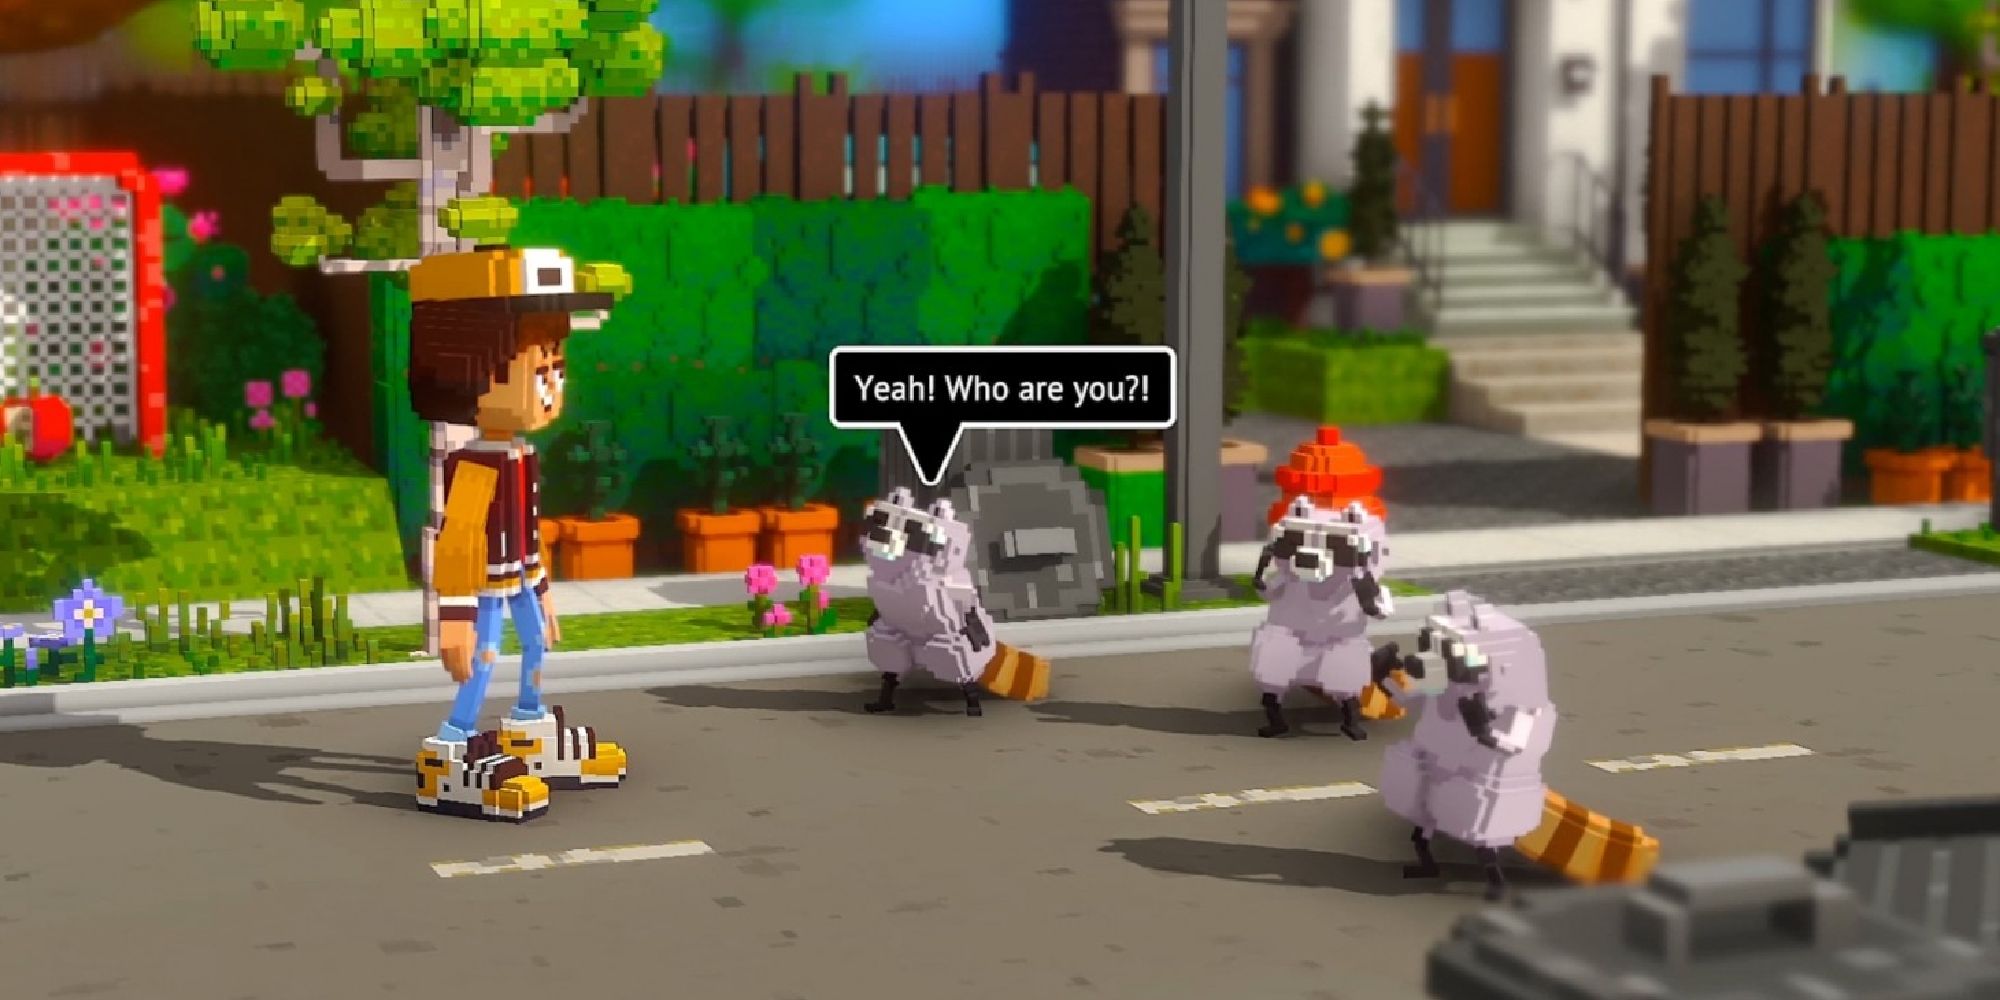 Raccoons taunting the player character in Echo Generation